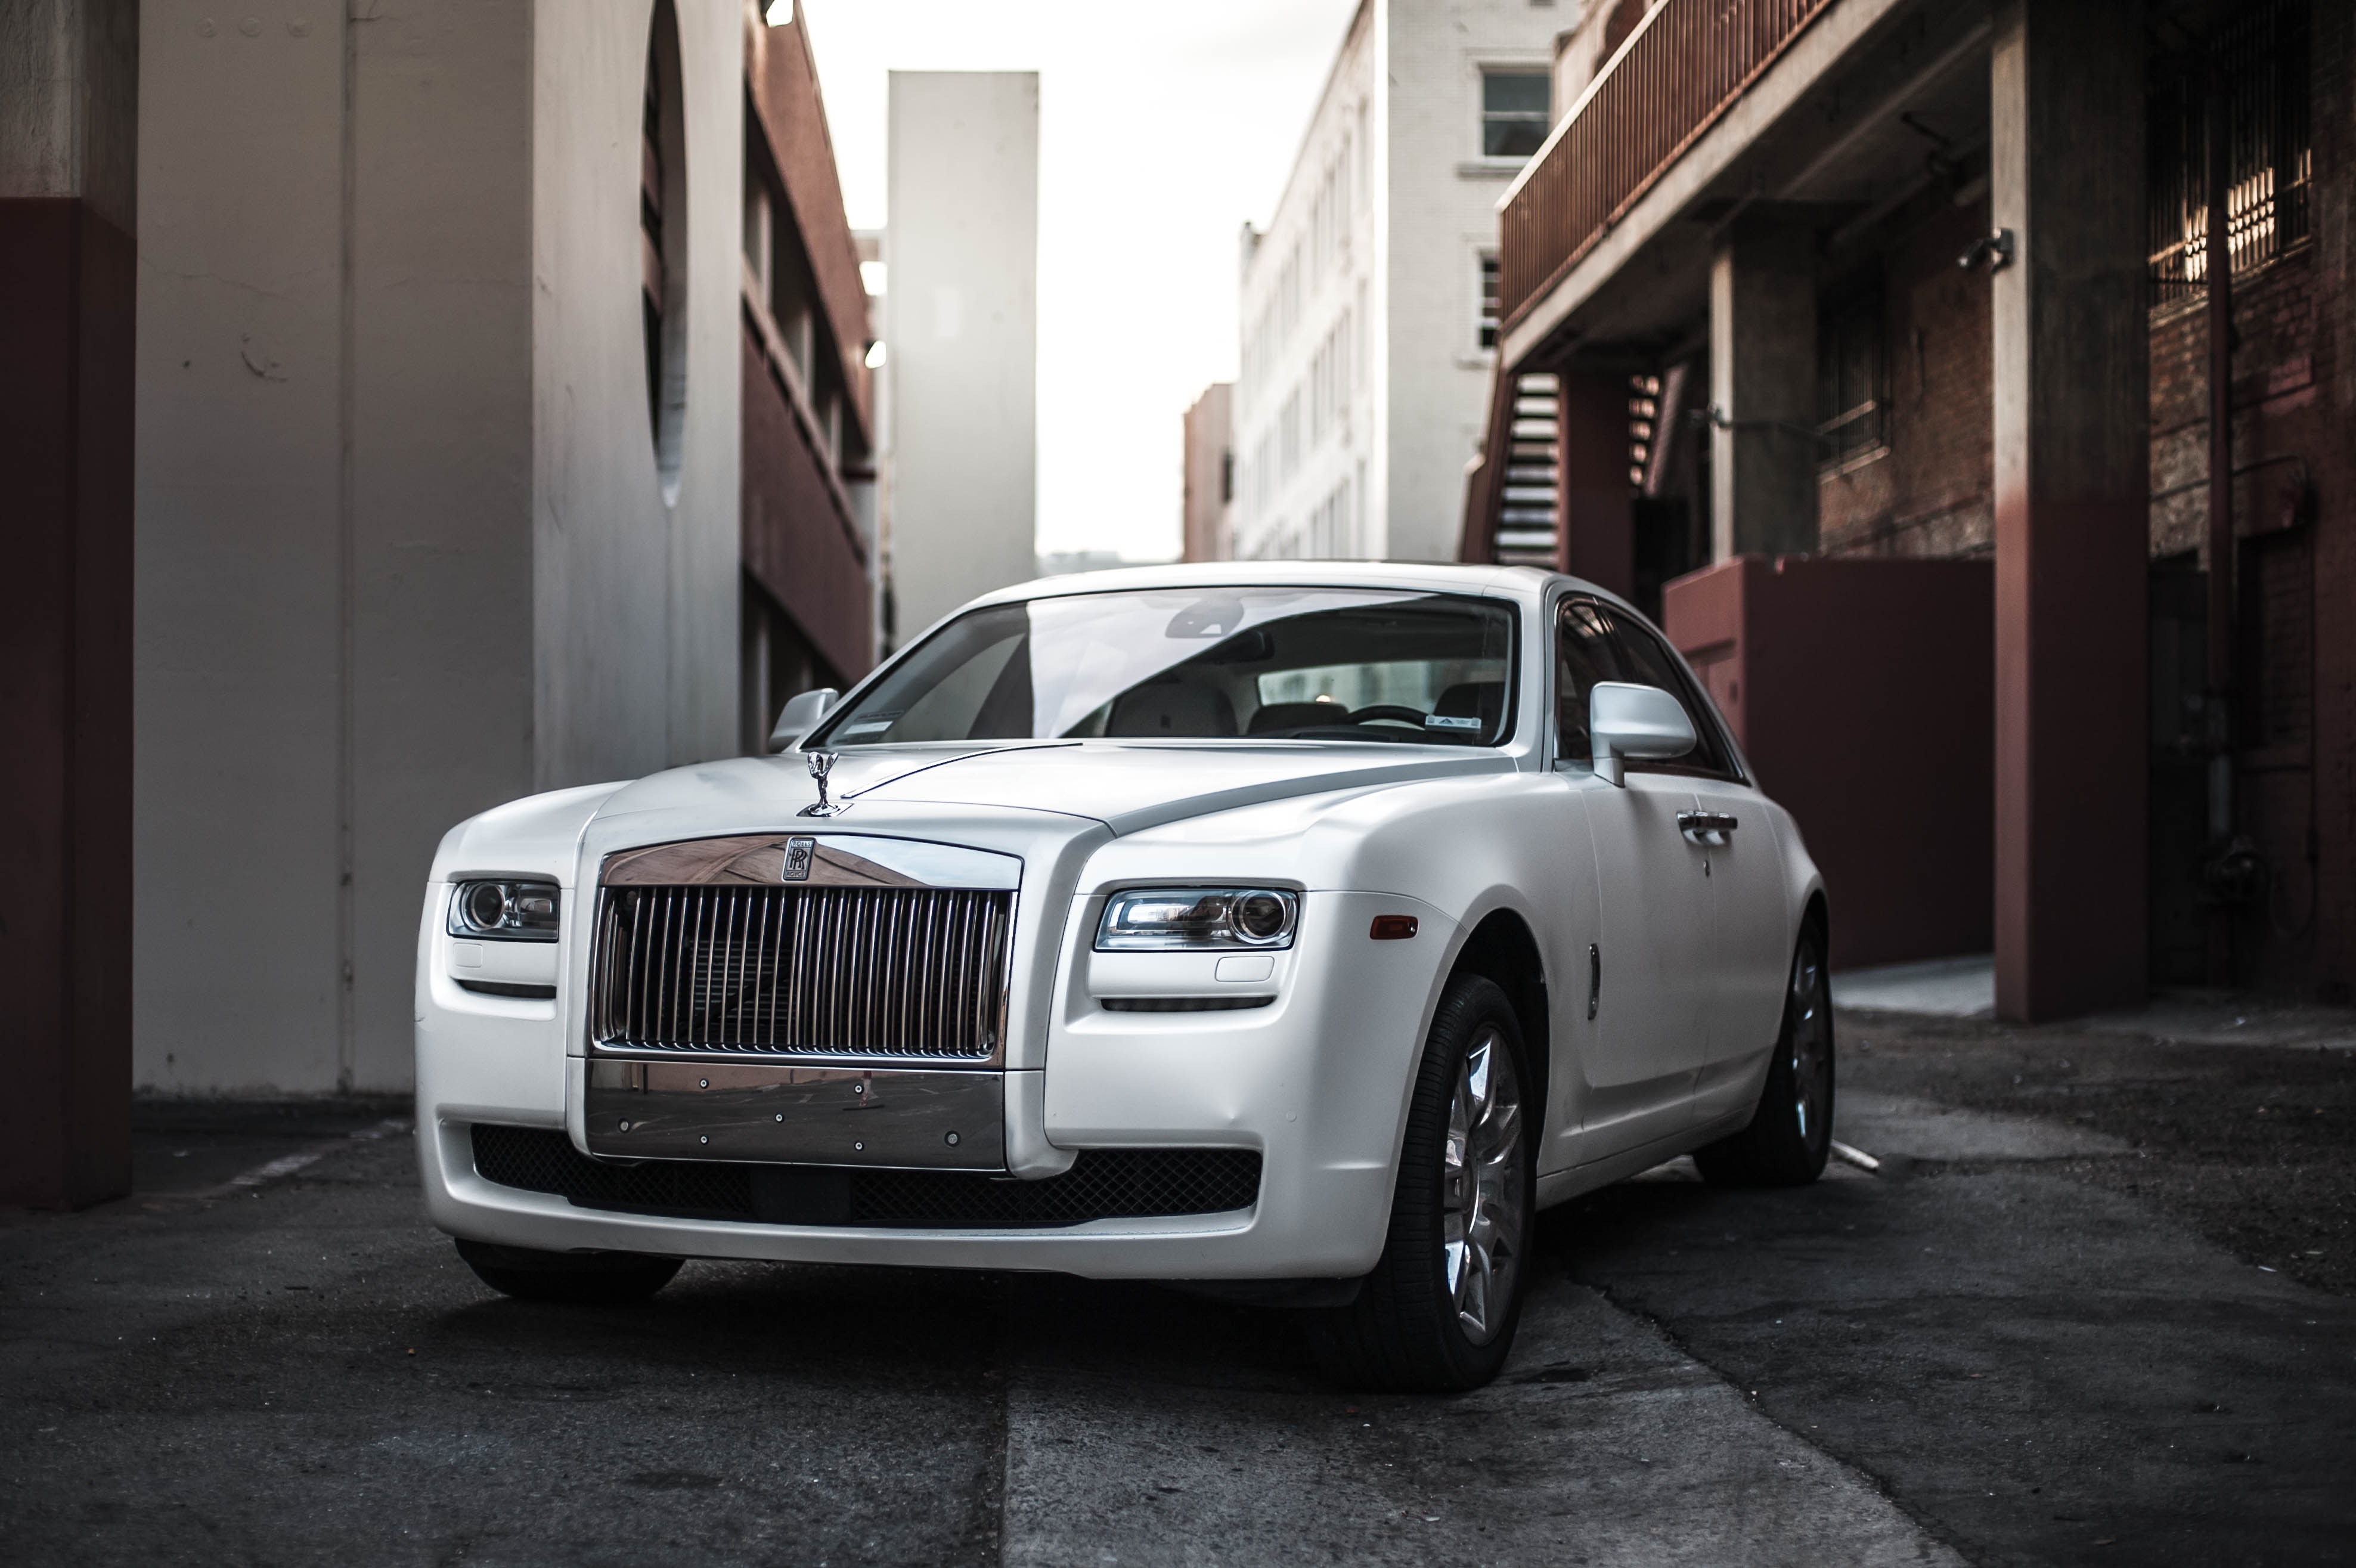 Rolls royce photos download the best free rolls royce stock photos hd images